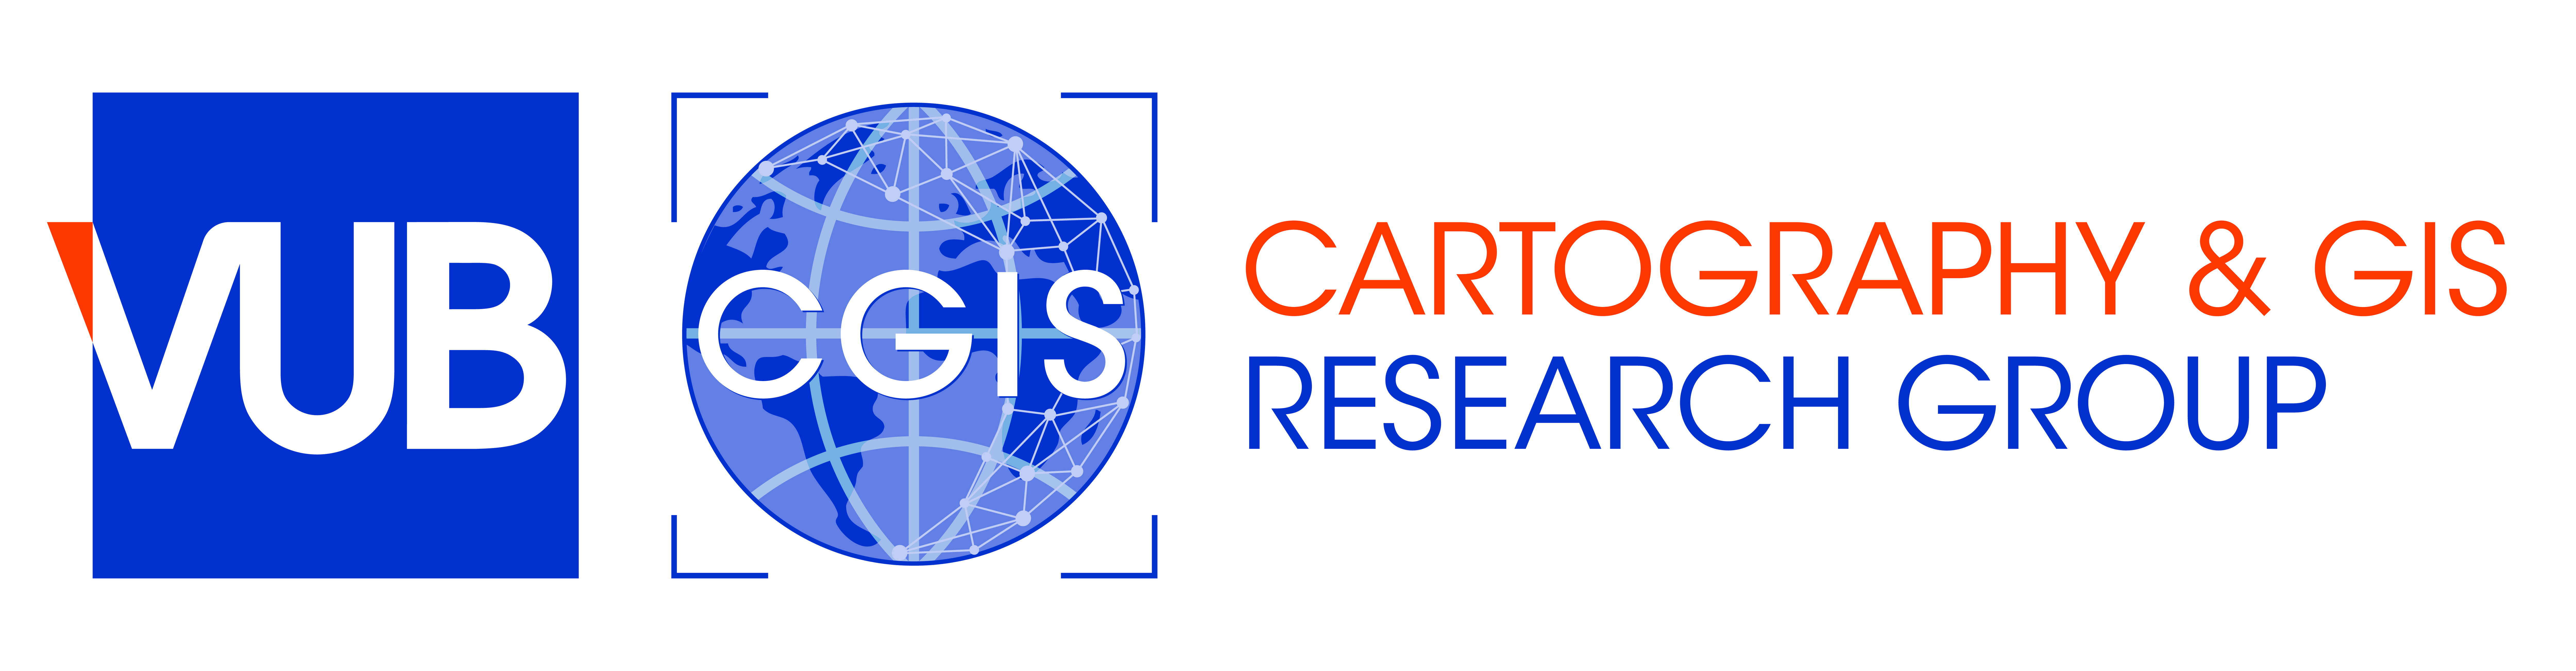 Cartography and GIS Research Group, Vrije Universiteit Brussel home page